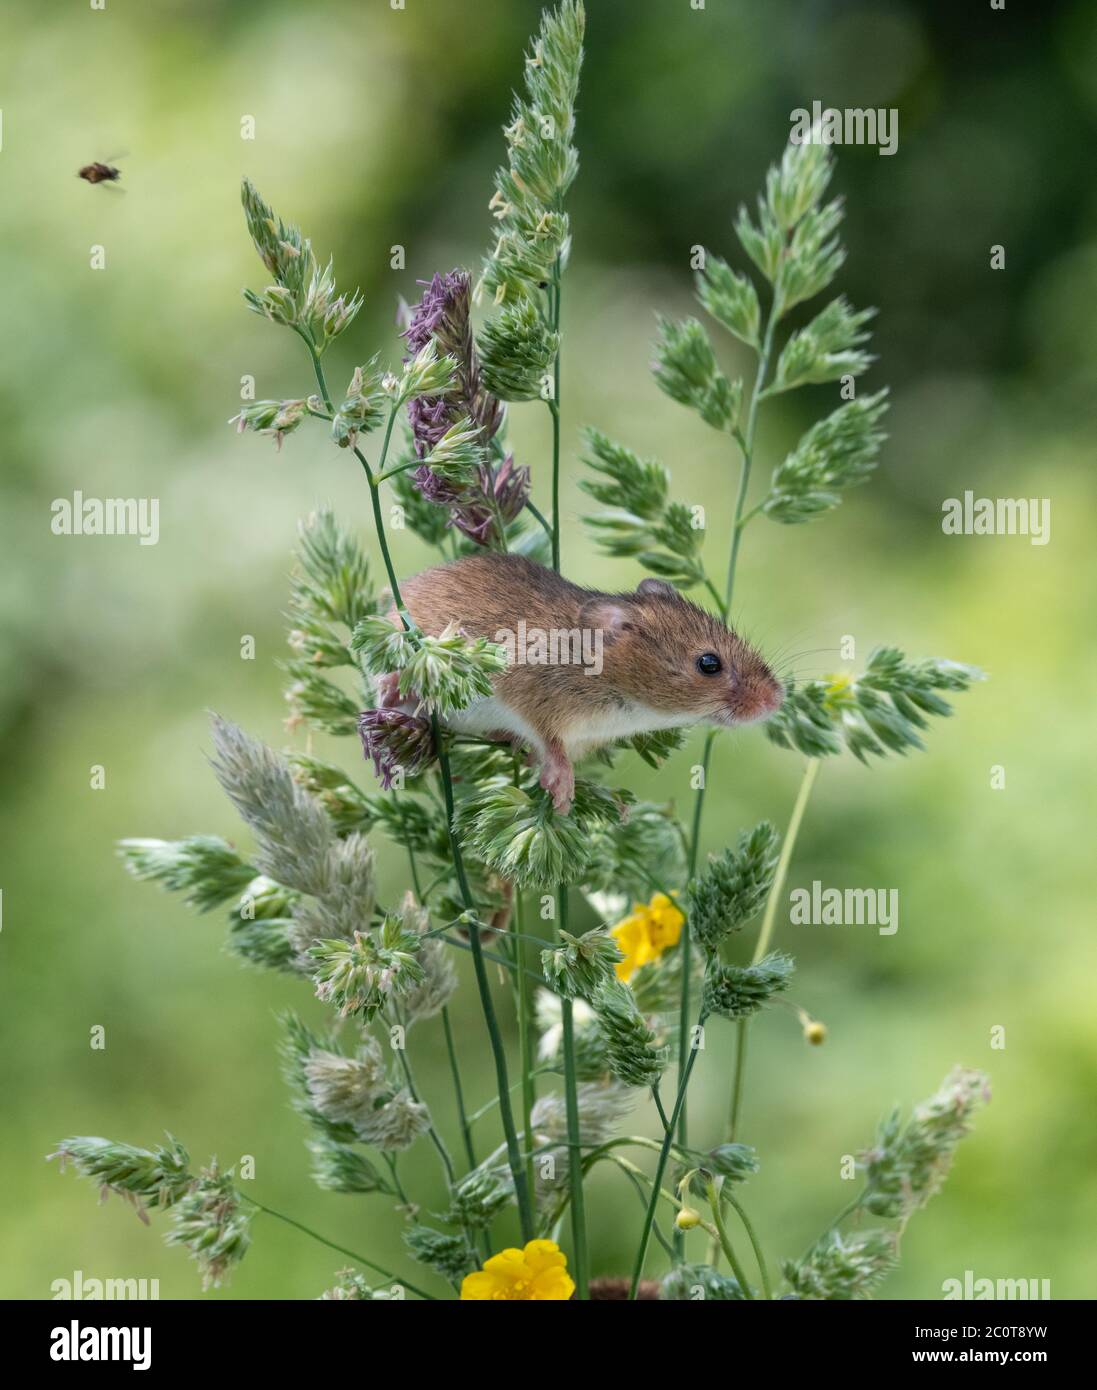 Adorable harvest mouse sitting amongst tall grasses Stock Photo